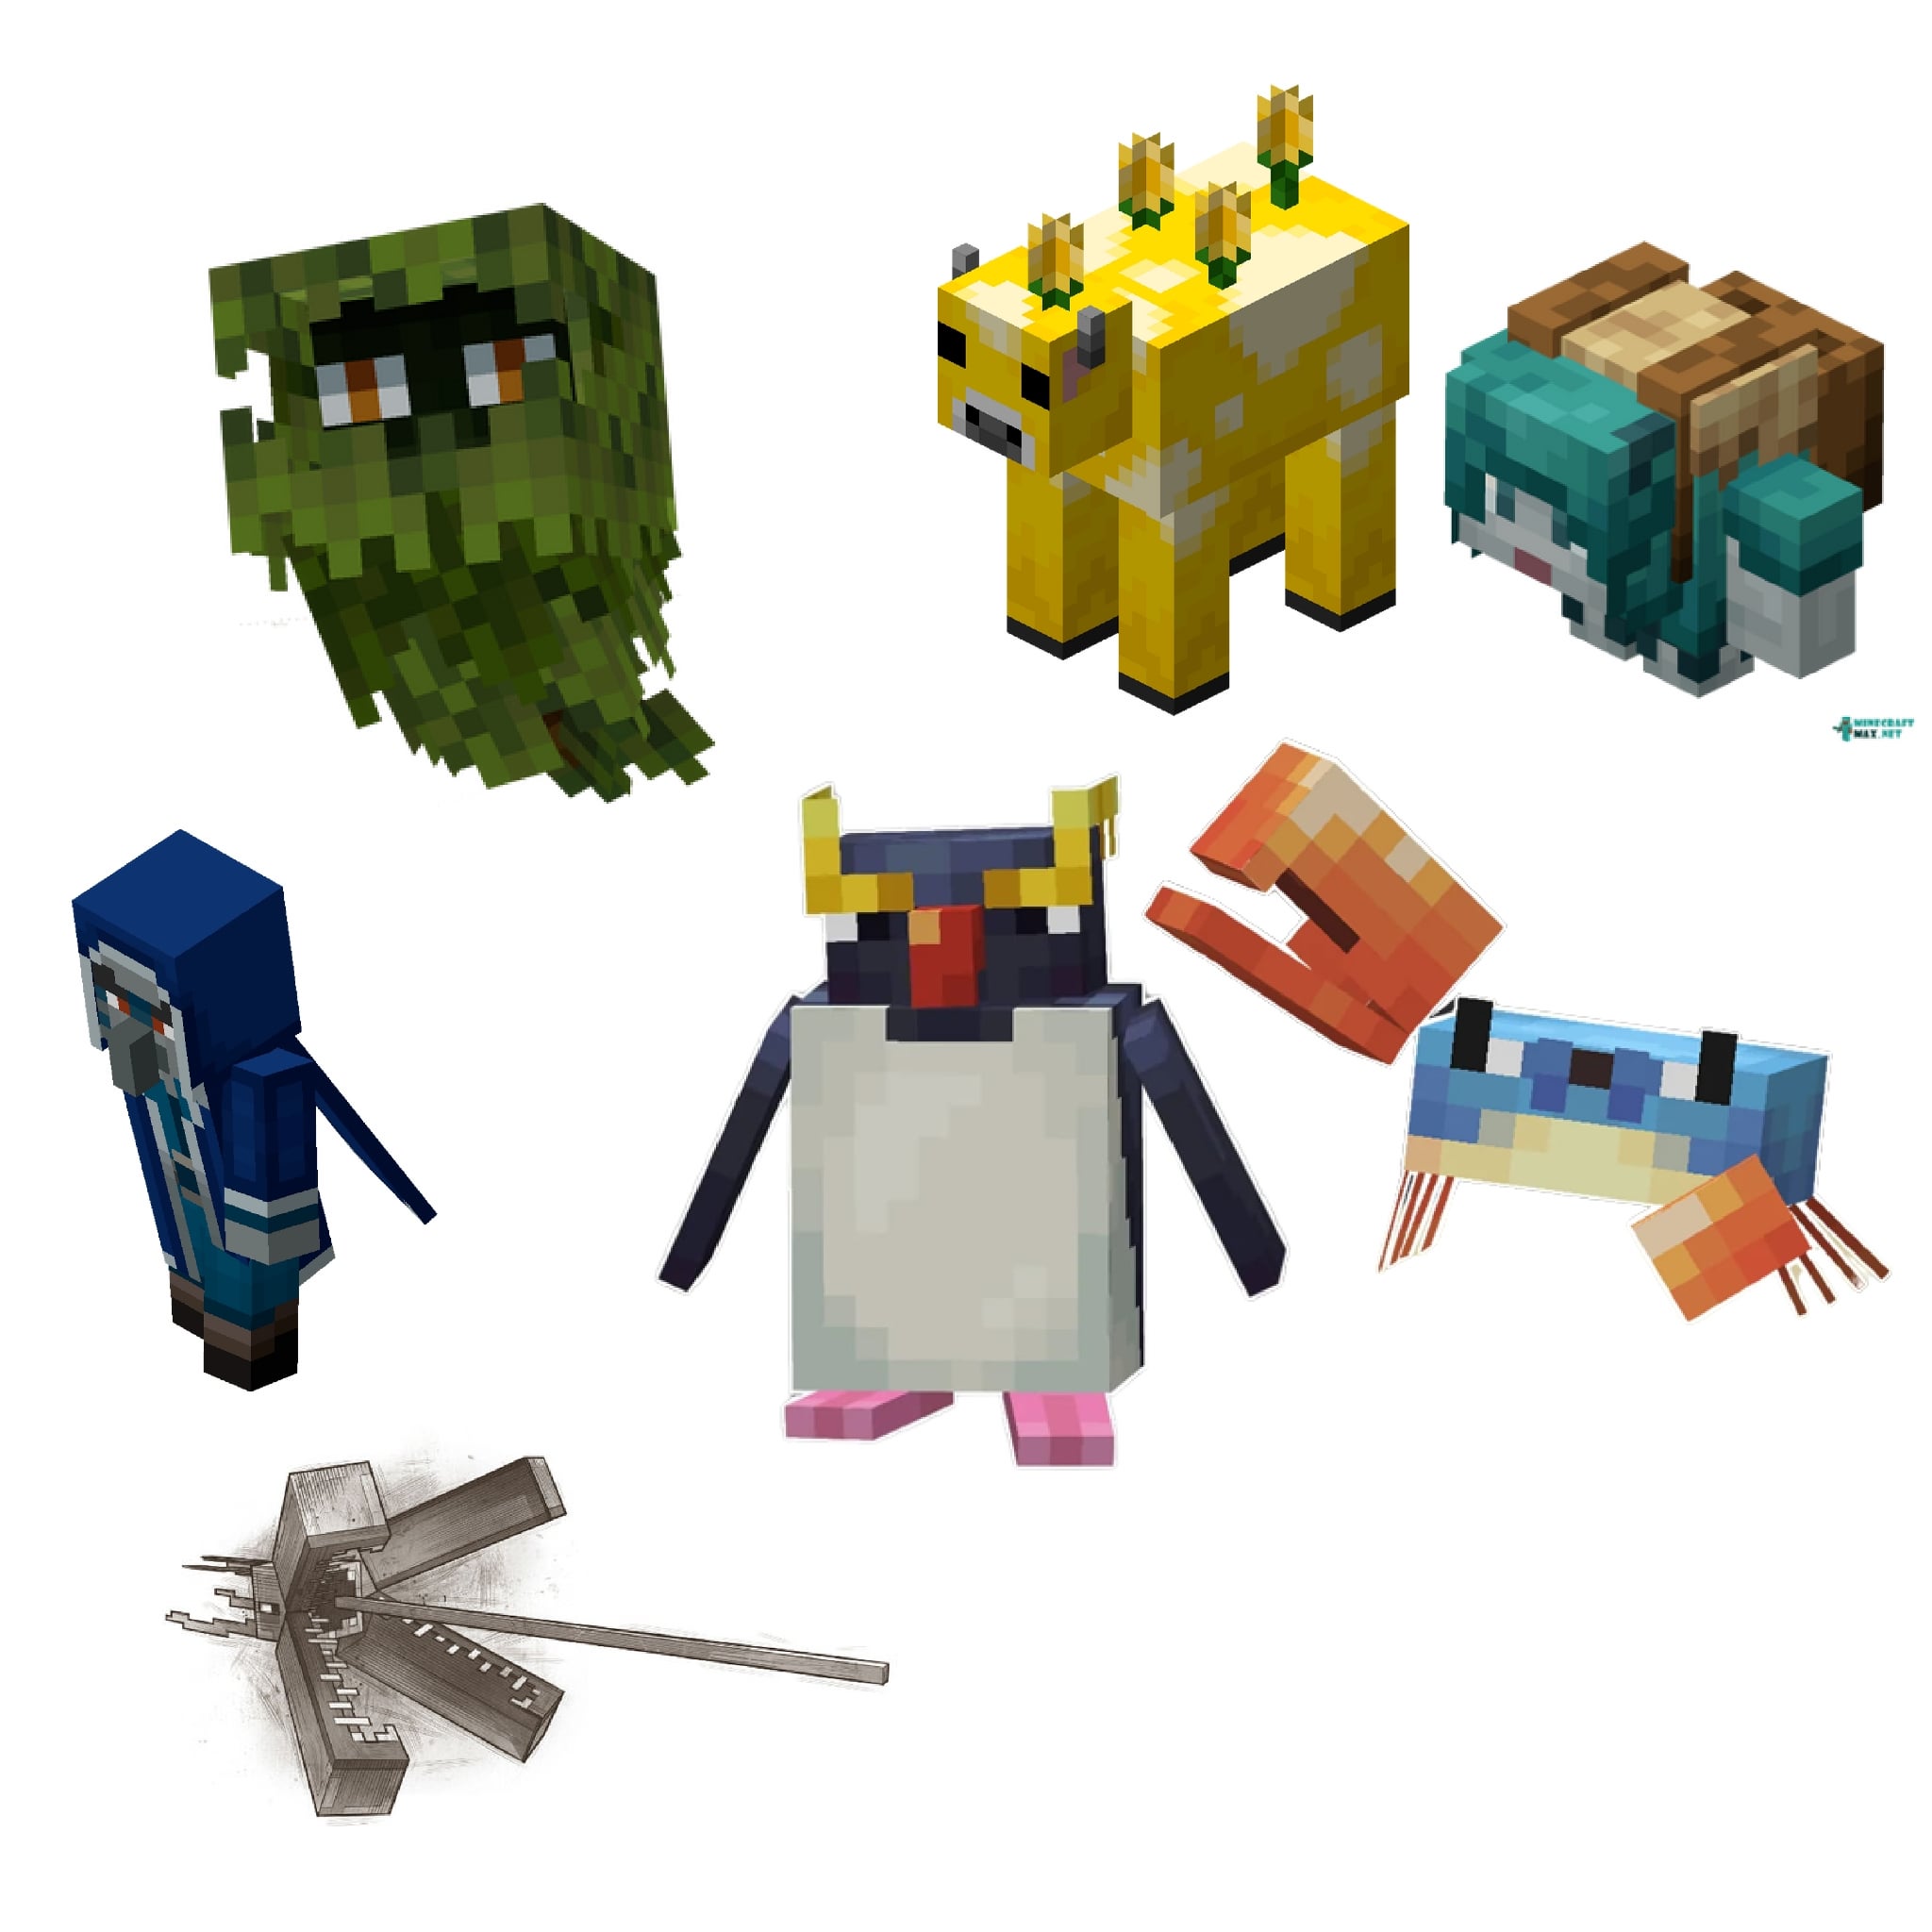 Minecraft Memes - Bye all this Mobs :(